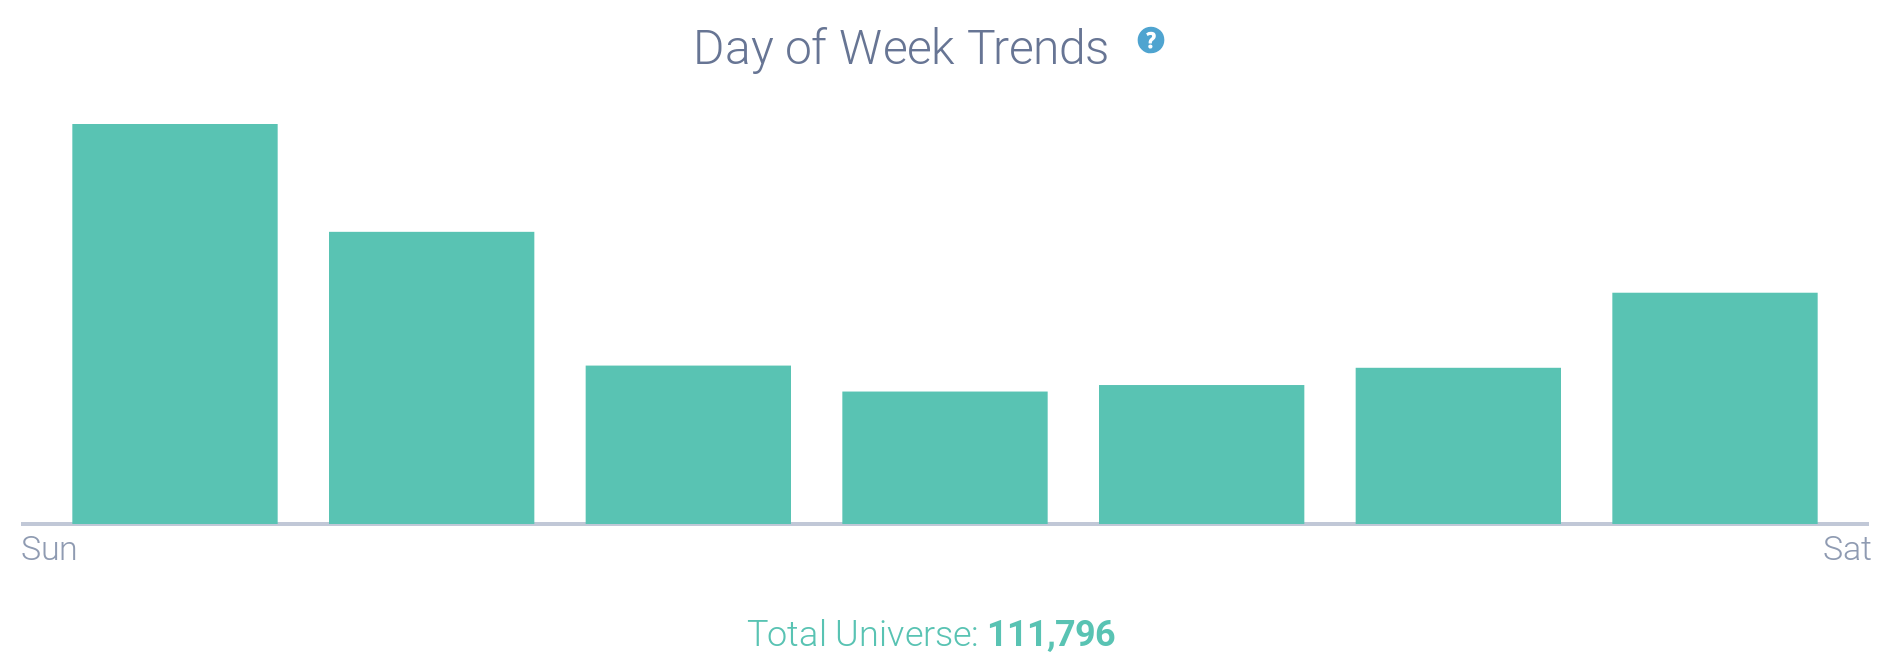 Bar graph showing days of the week
